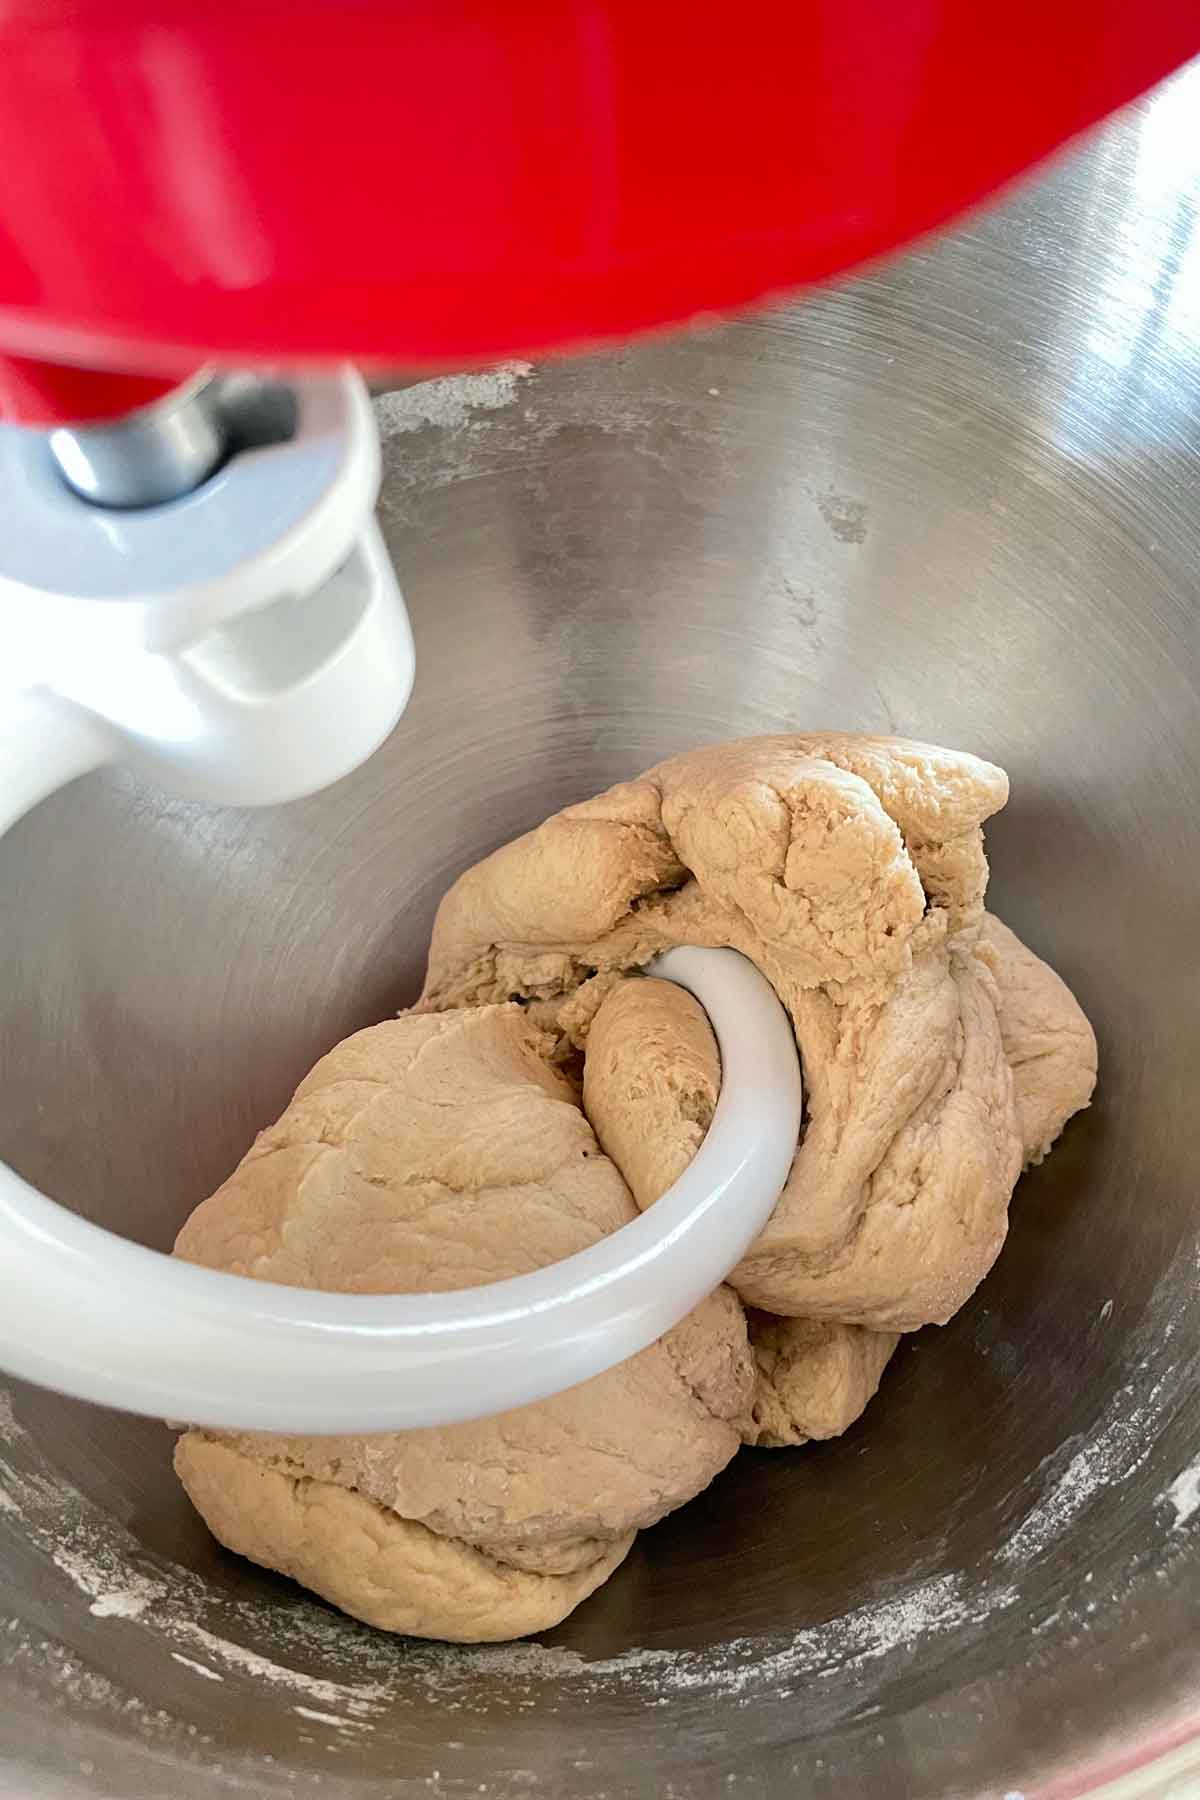 How to Knead with a Stand-Mixer 